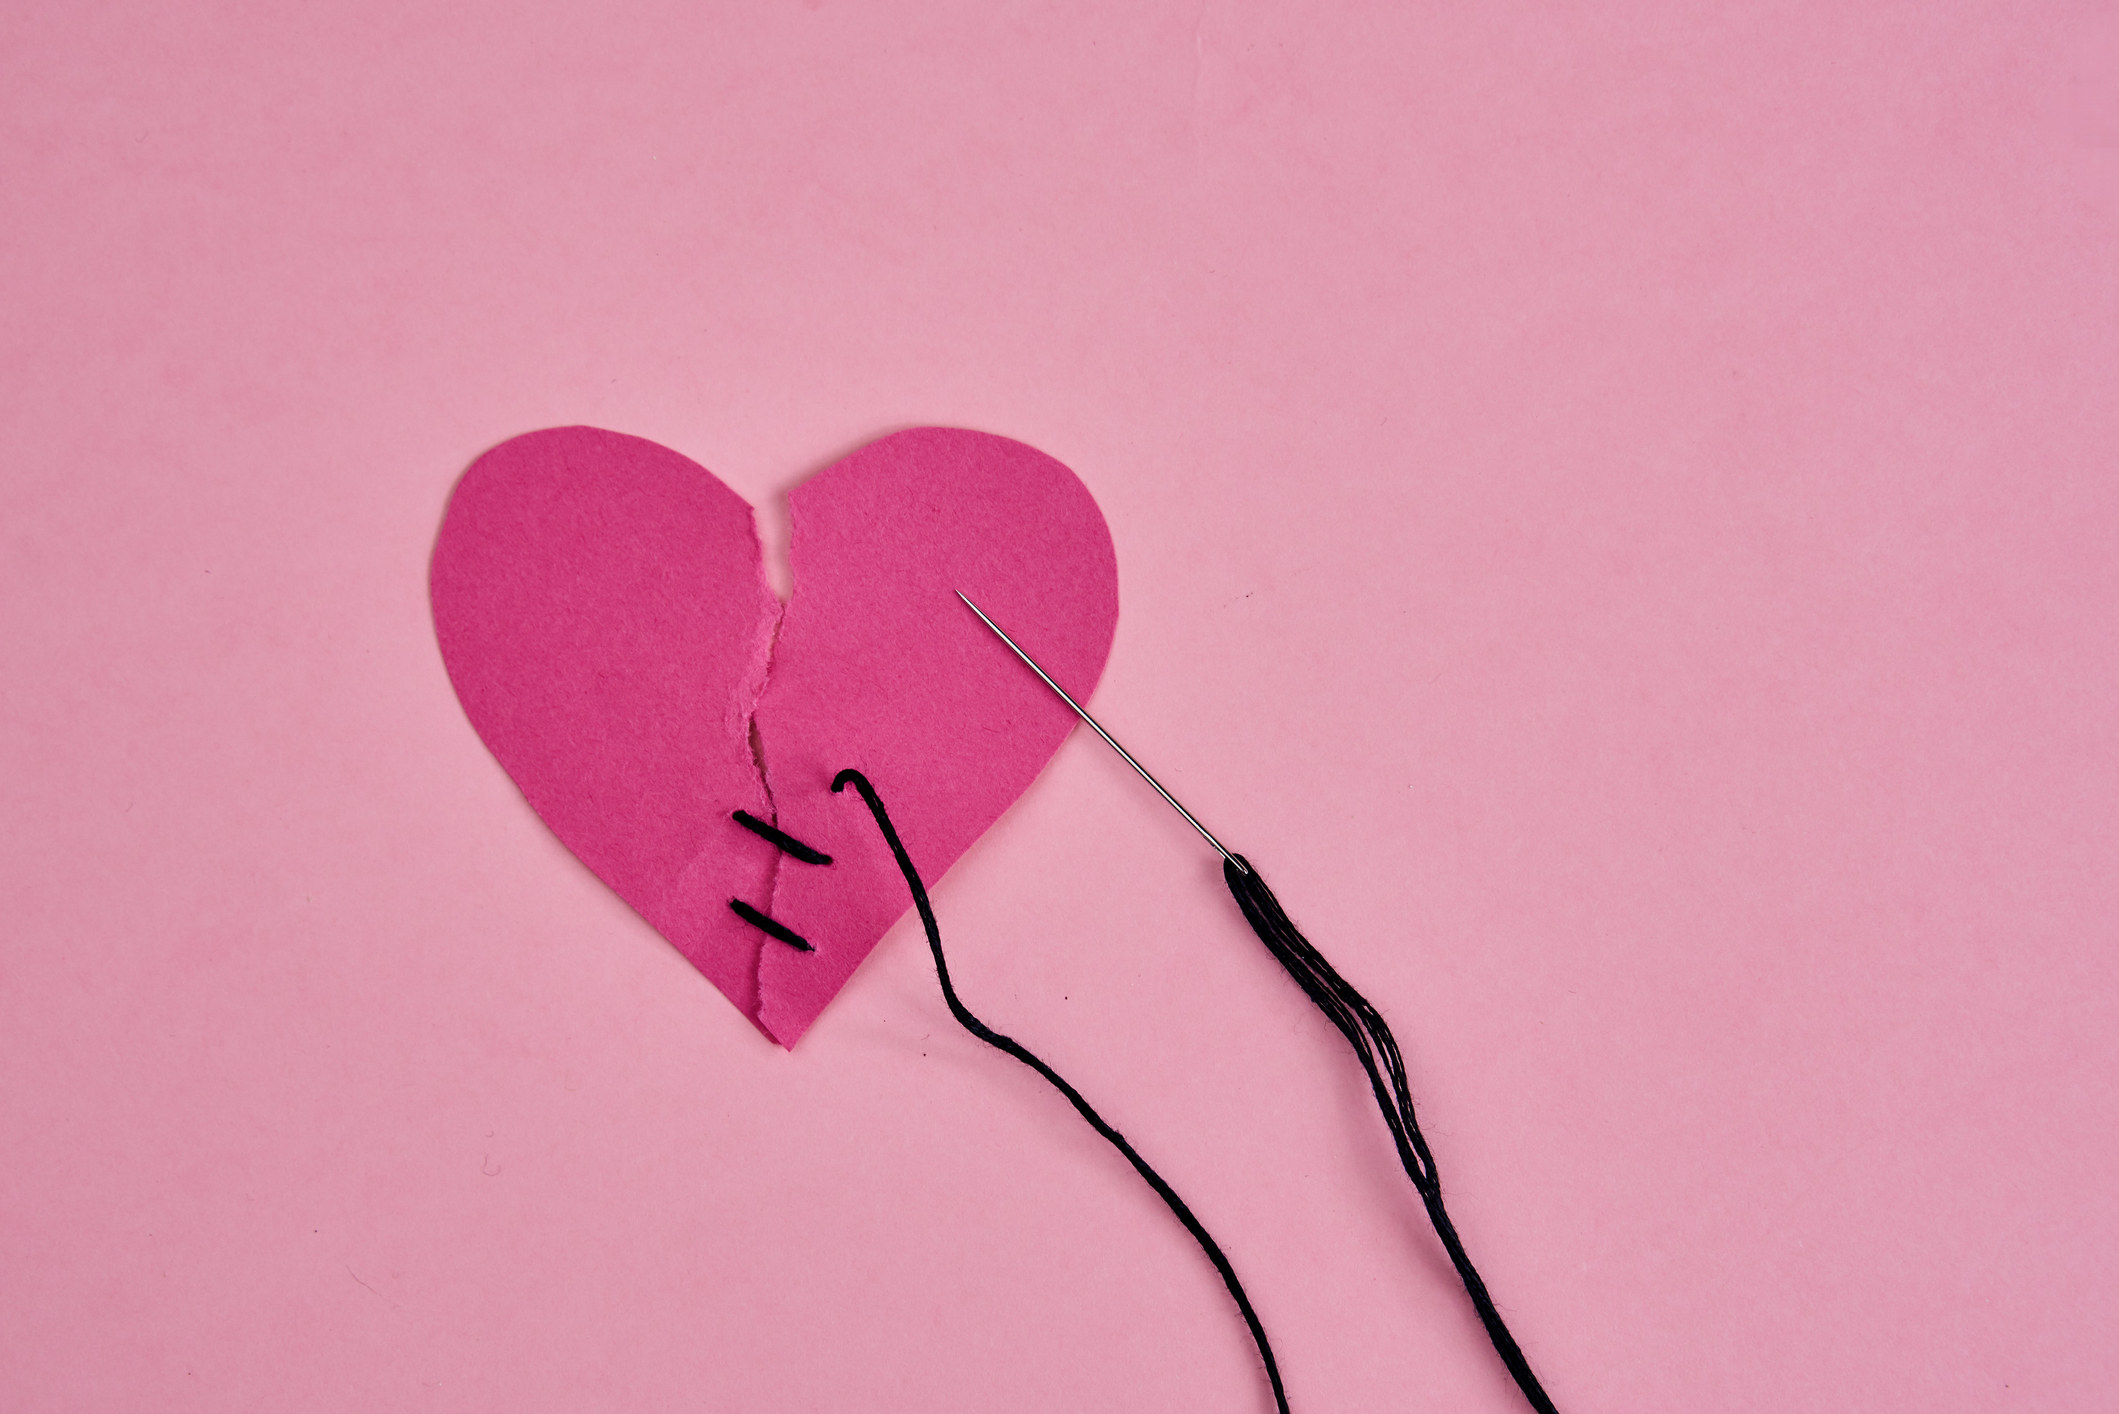 A heart and a sewing needle